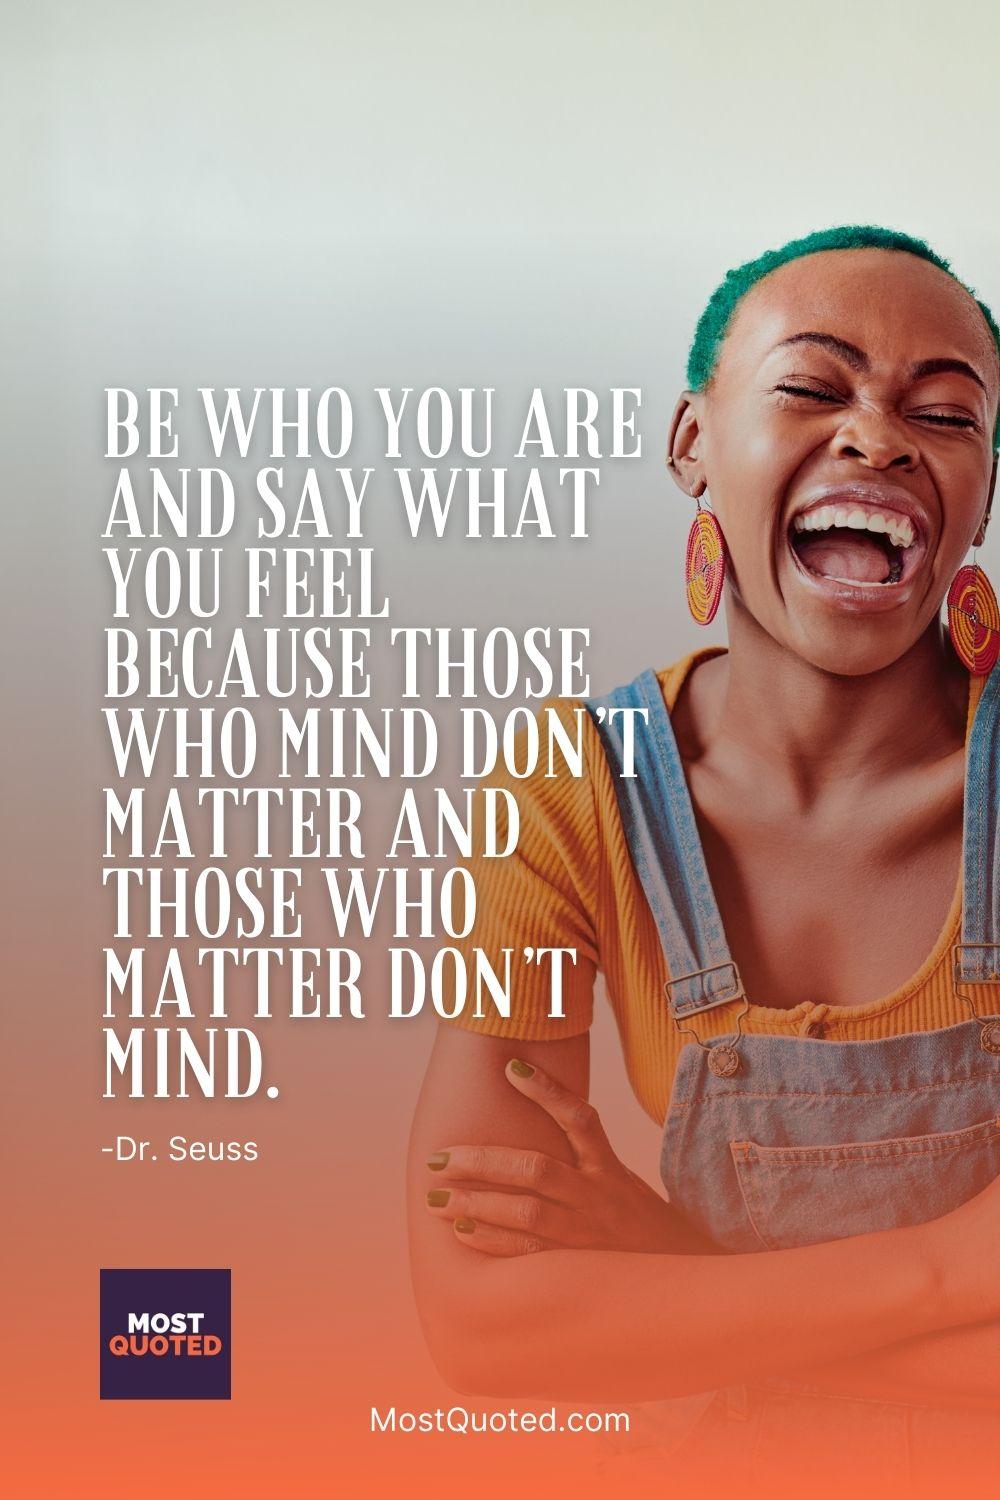 Be who you are and say what you feel because those who mind don’t matter and those who matter don’t mind. - Dr. Seuss